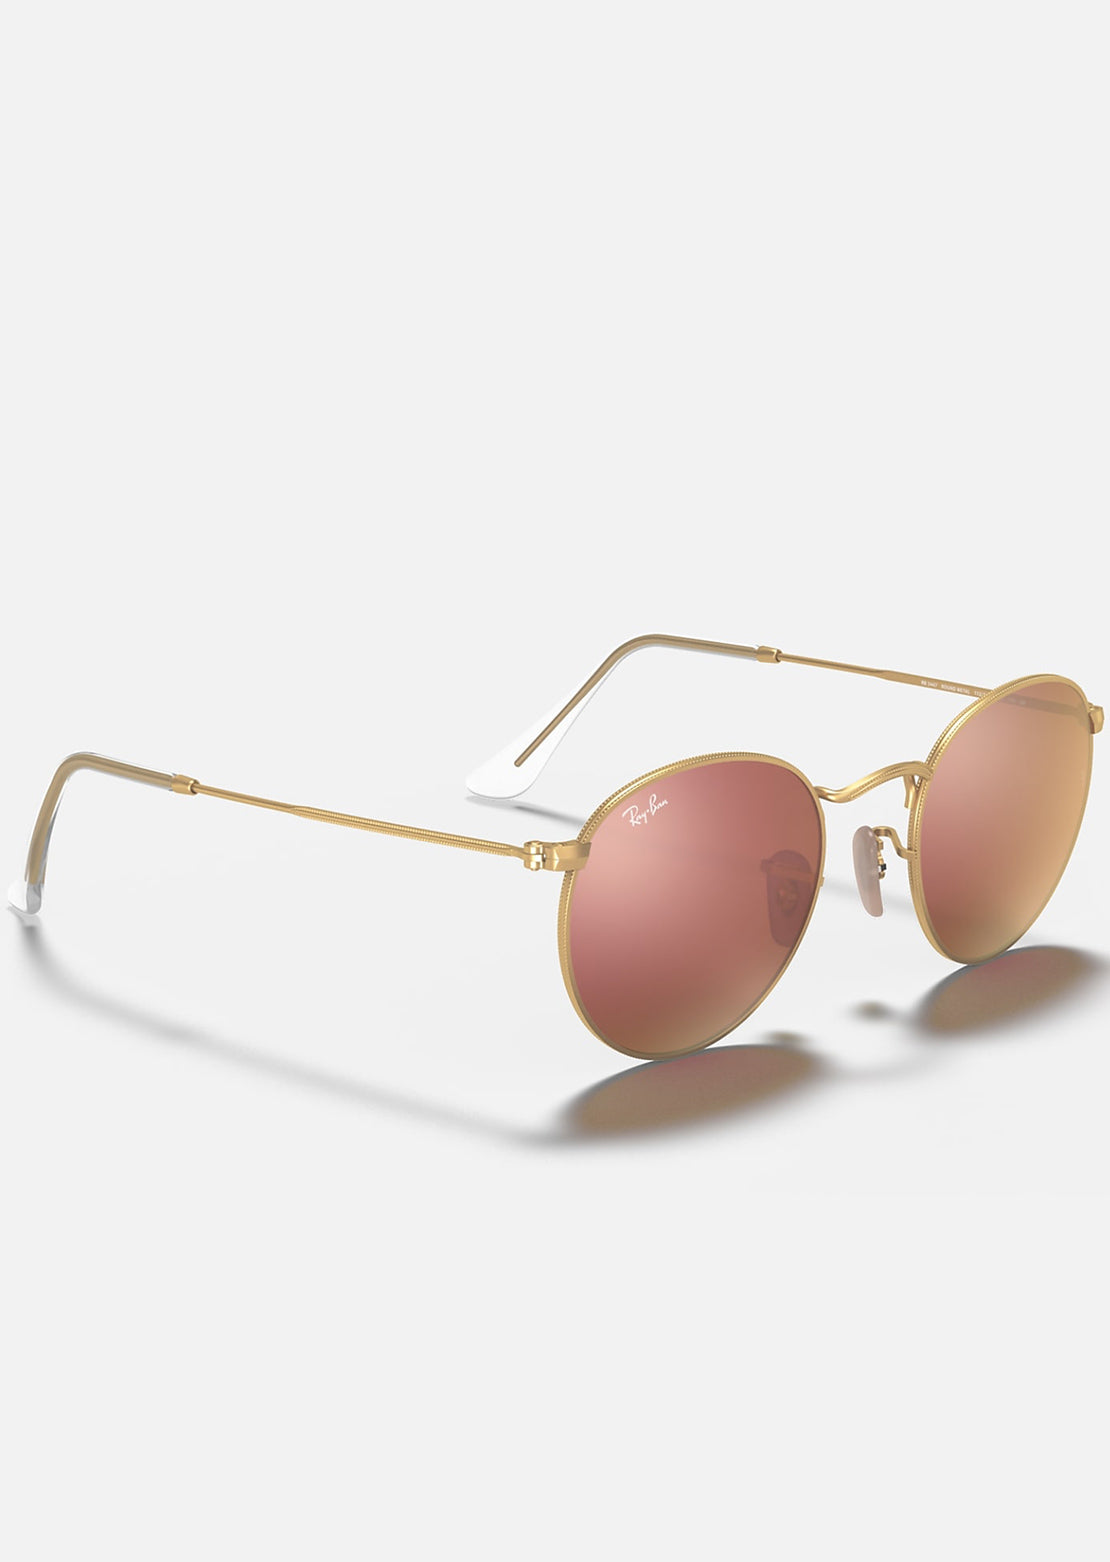 Ray-Ban Round Metal Legend Gold RB3447 Sunglasses Metal Gold/Copper Flash